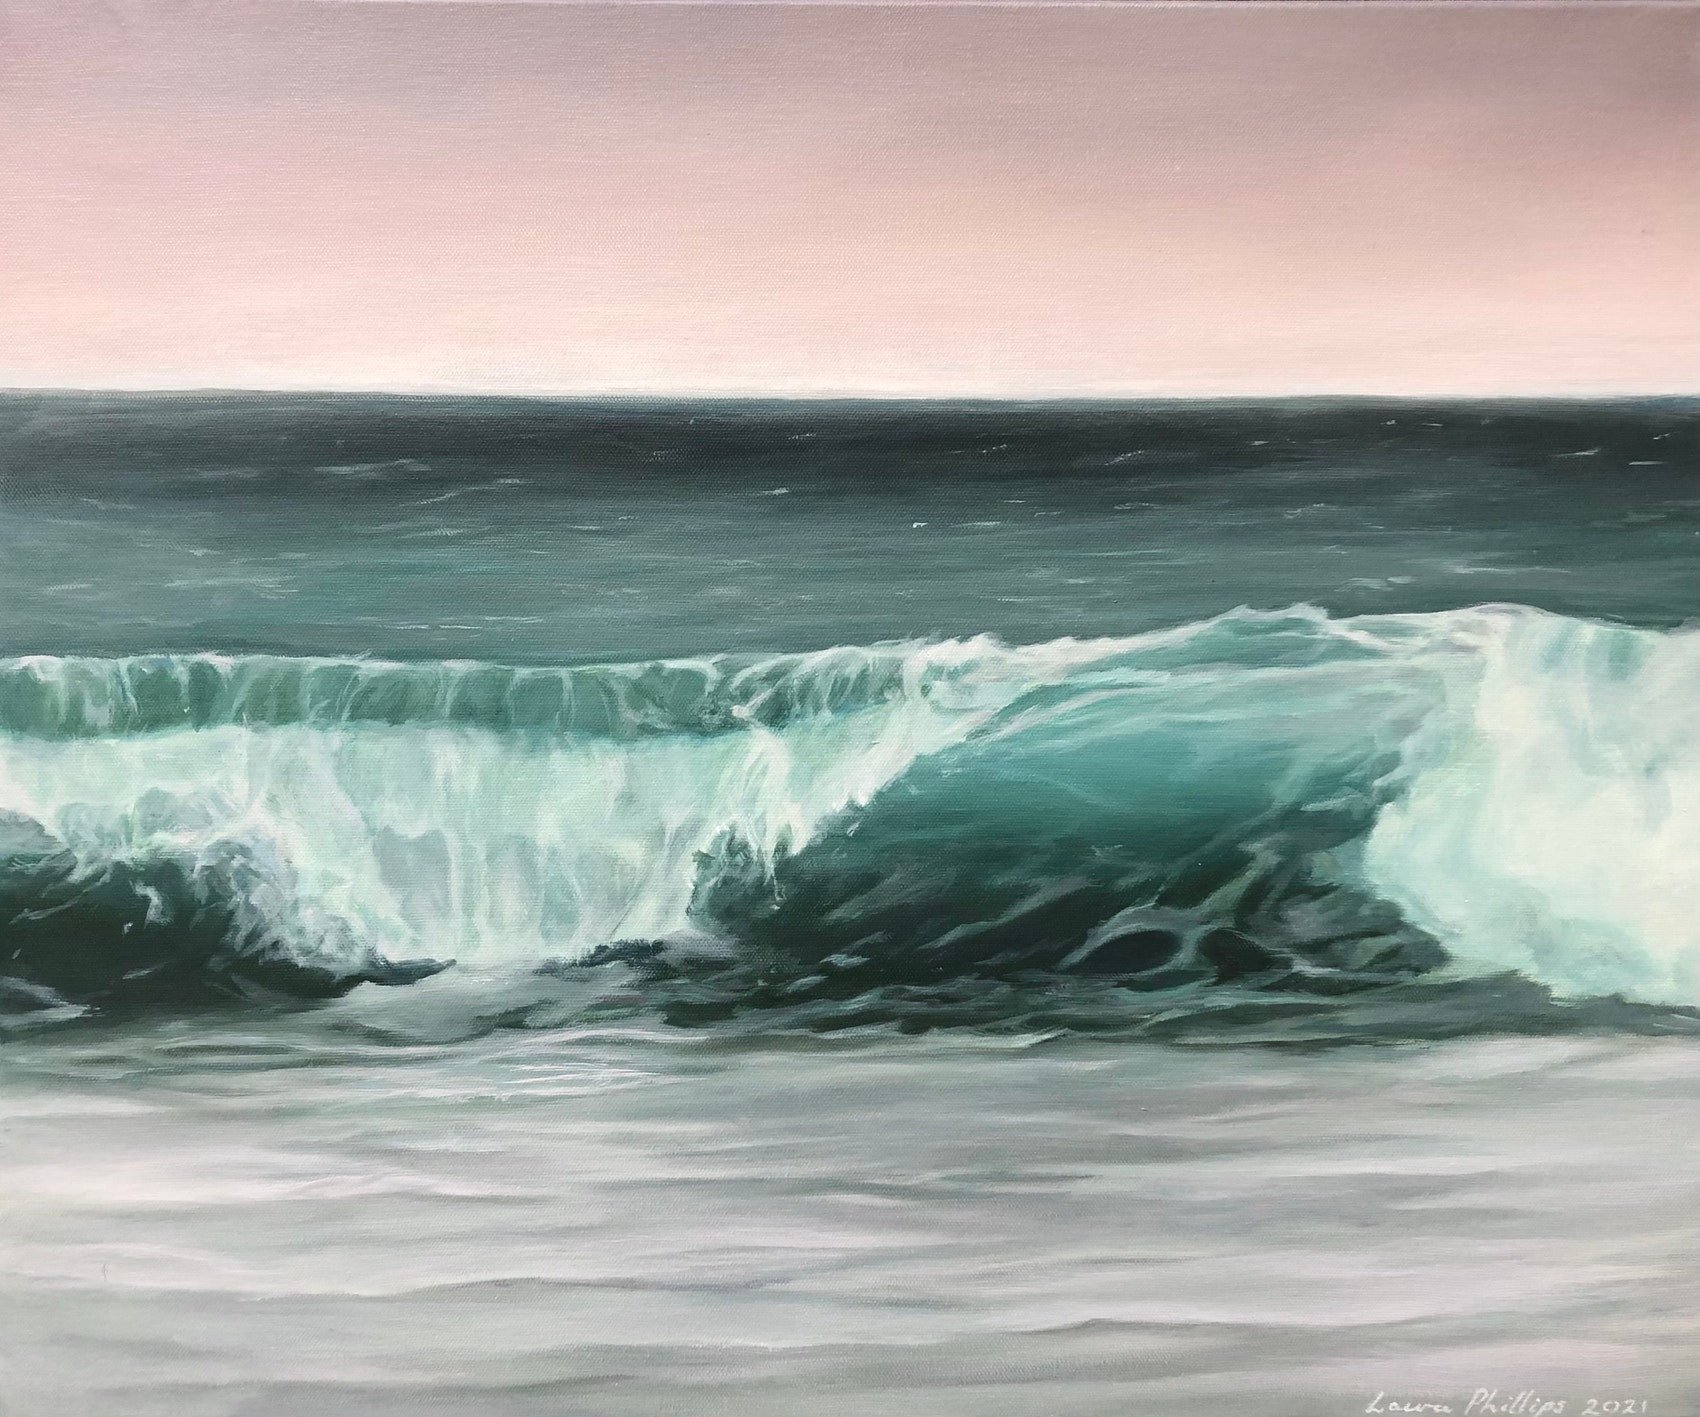 Tumble by Laura Phillips. A moody, stormy seascape of a wave under a dawn or dusk sky. Art.